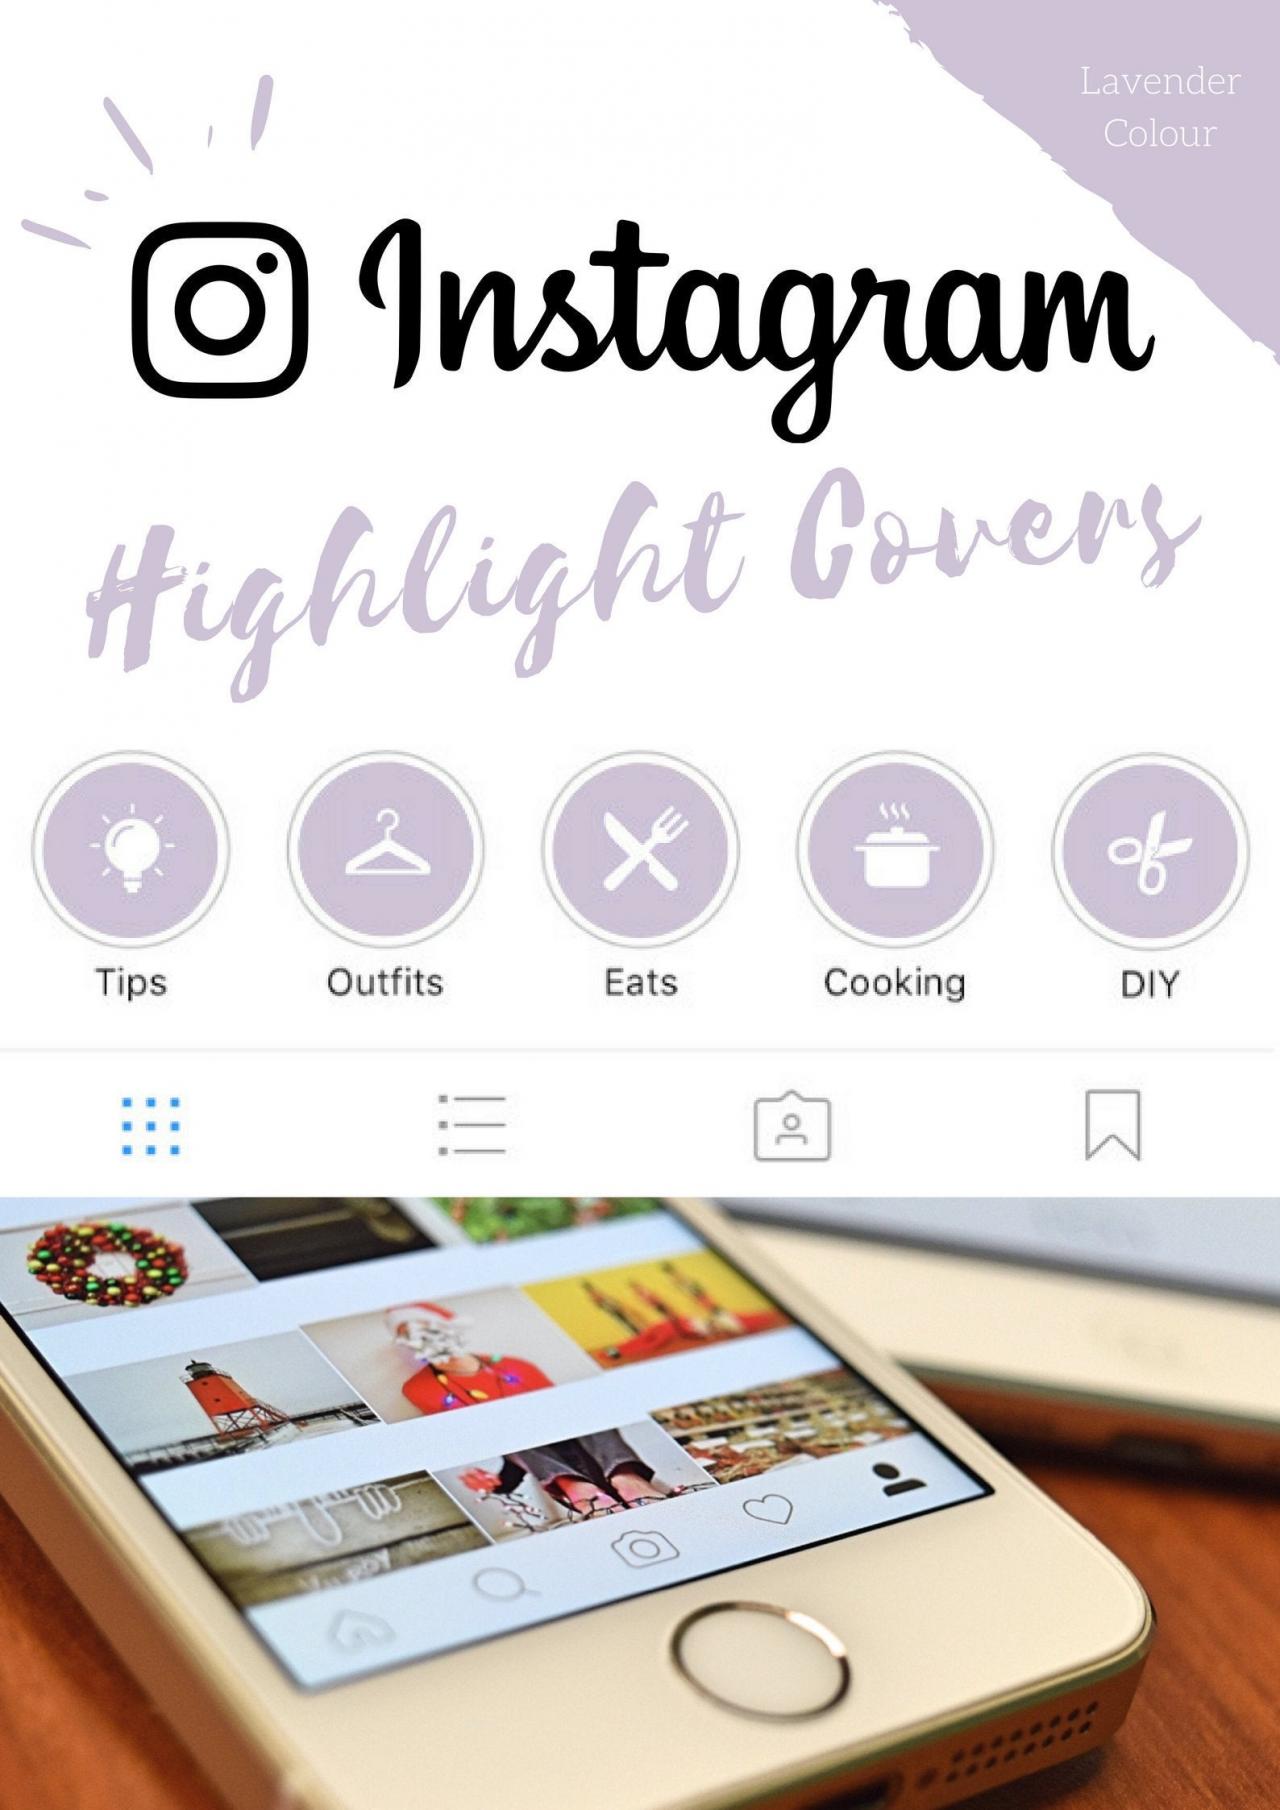 70 Instagram Stories Highlight Covers in Lavender Colour.